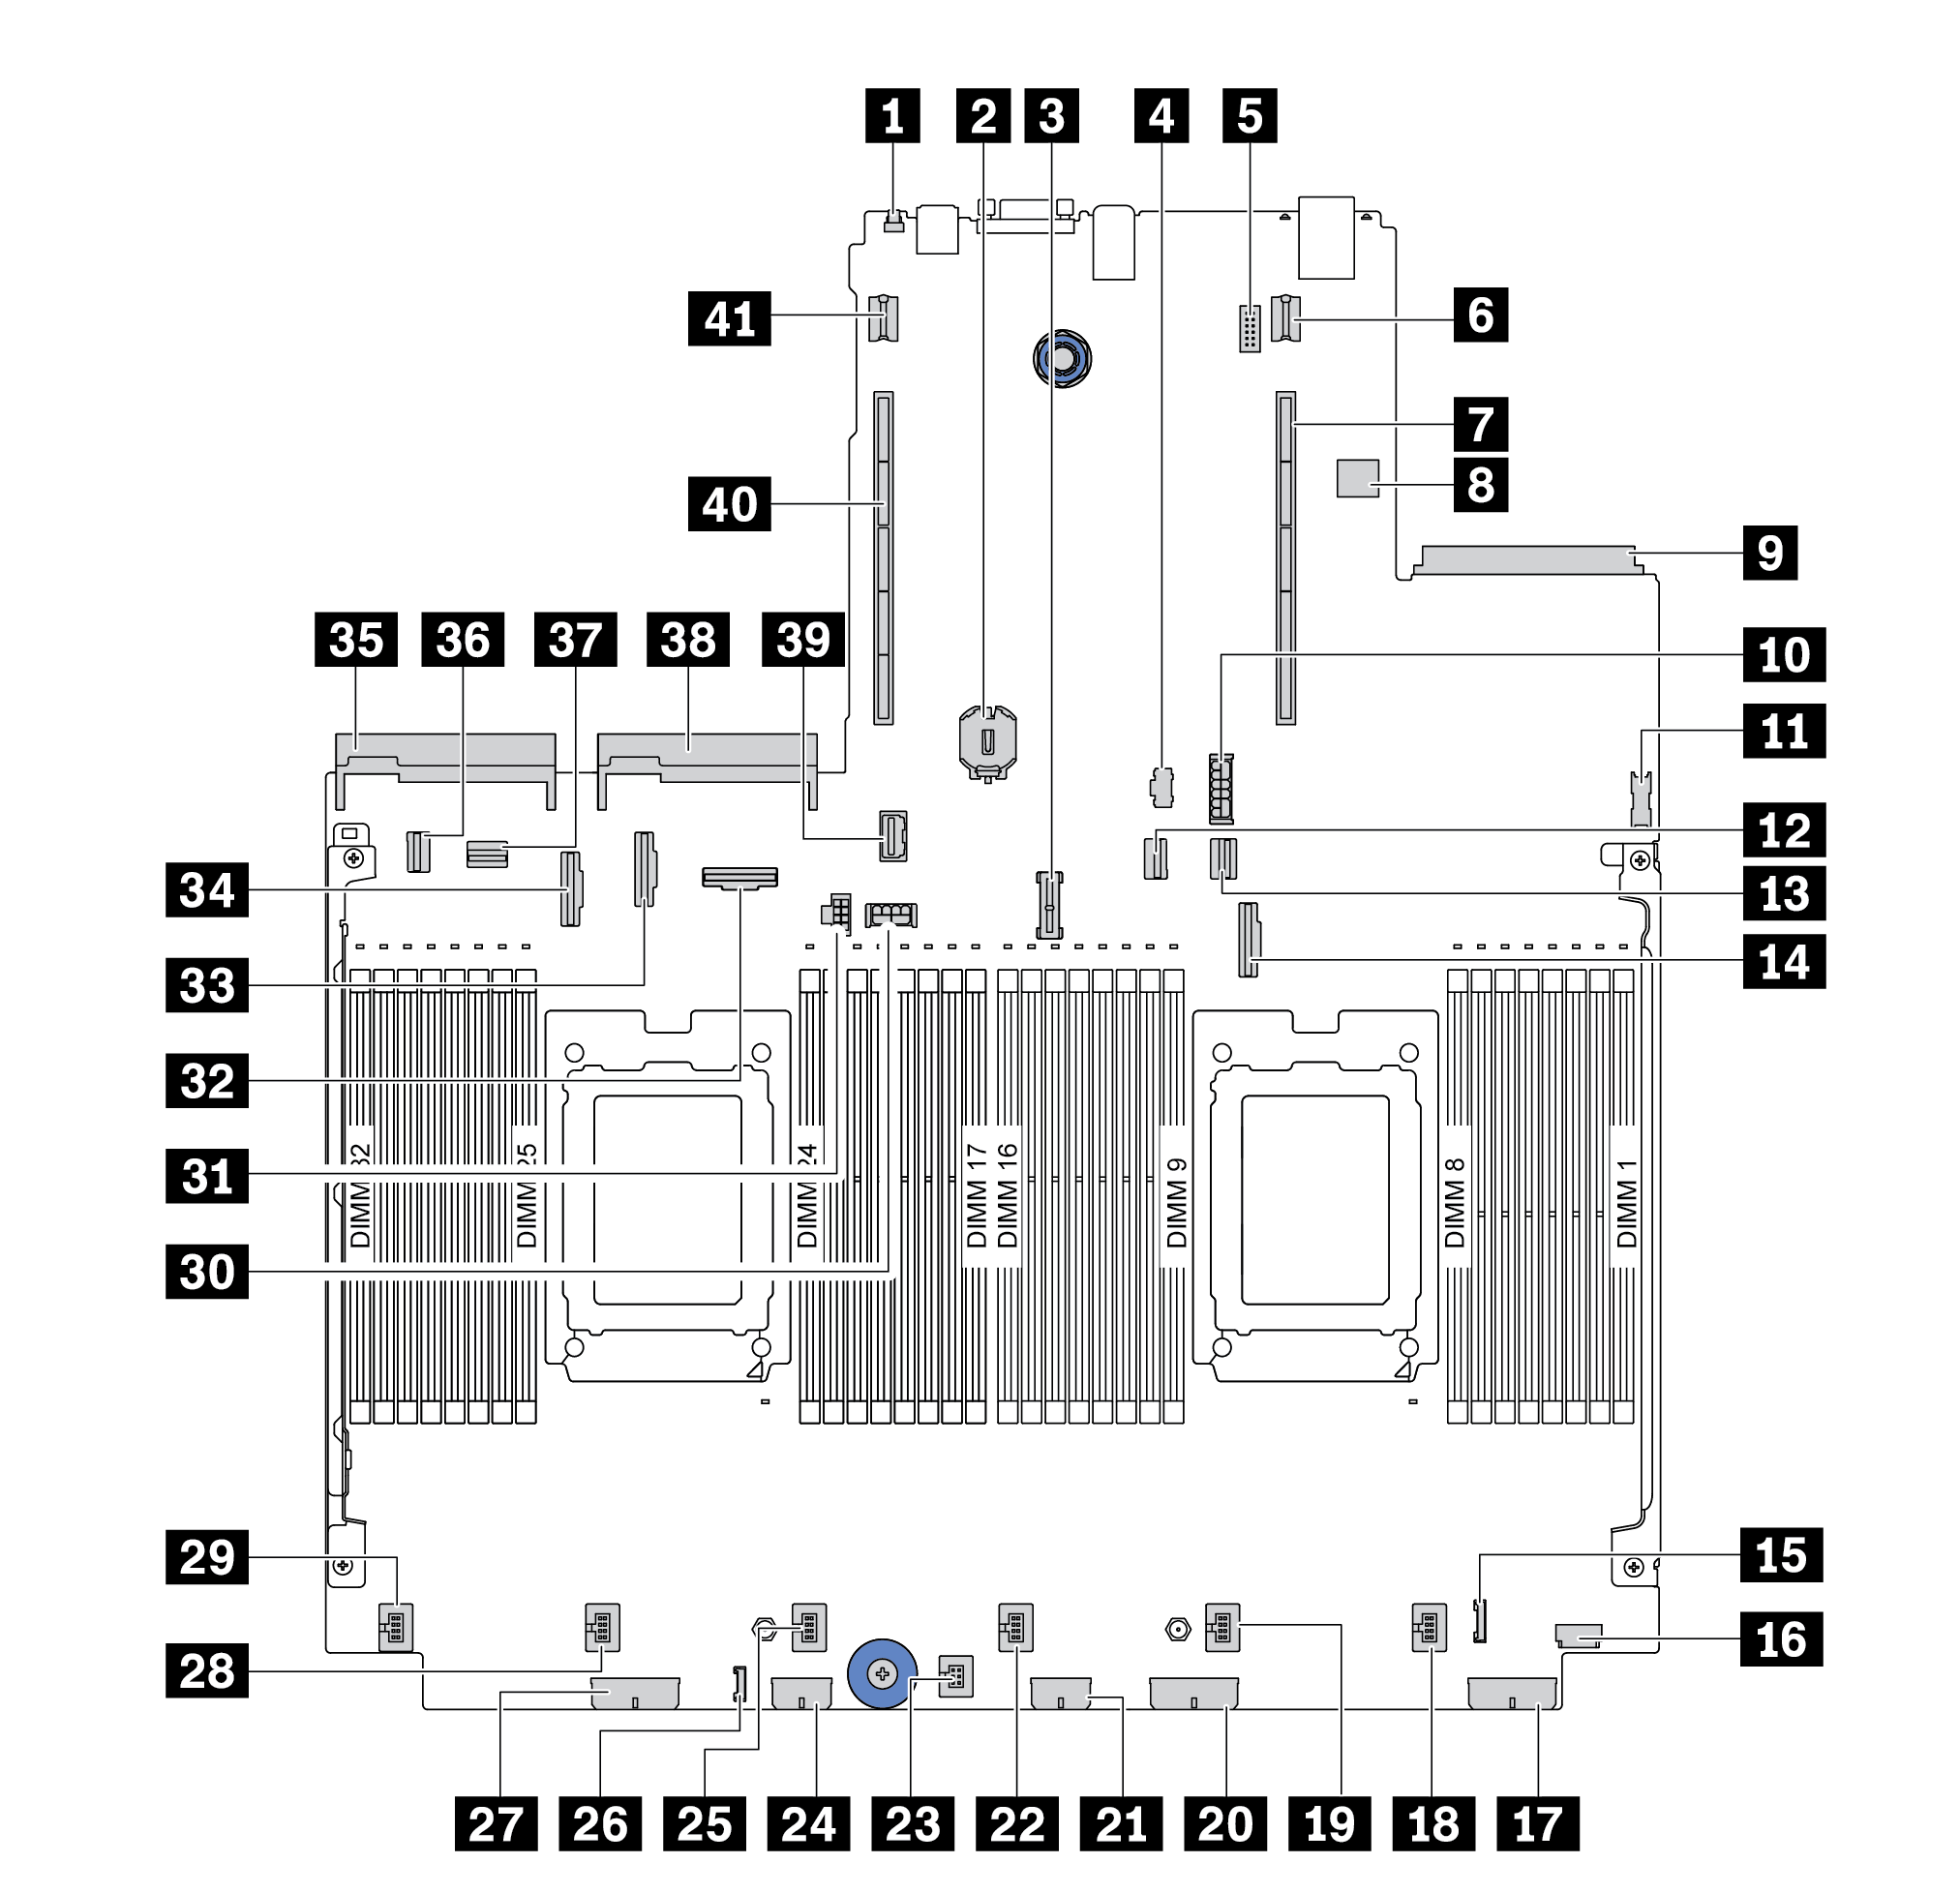 System board components